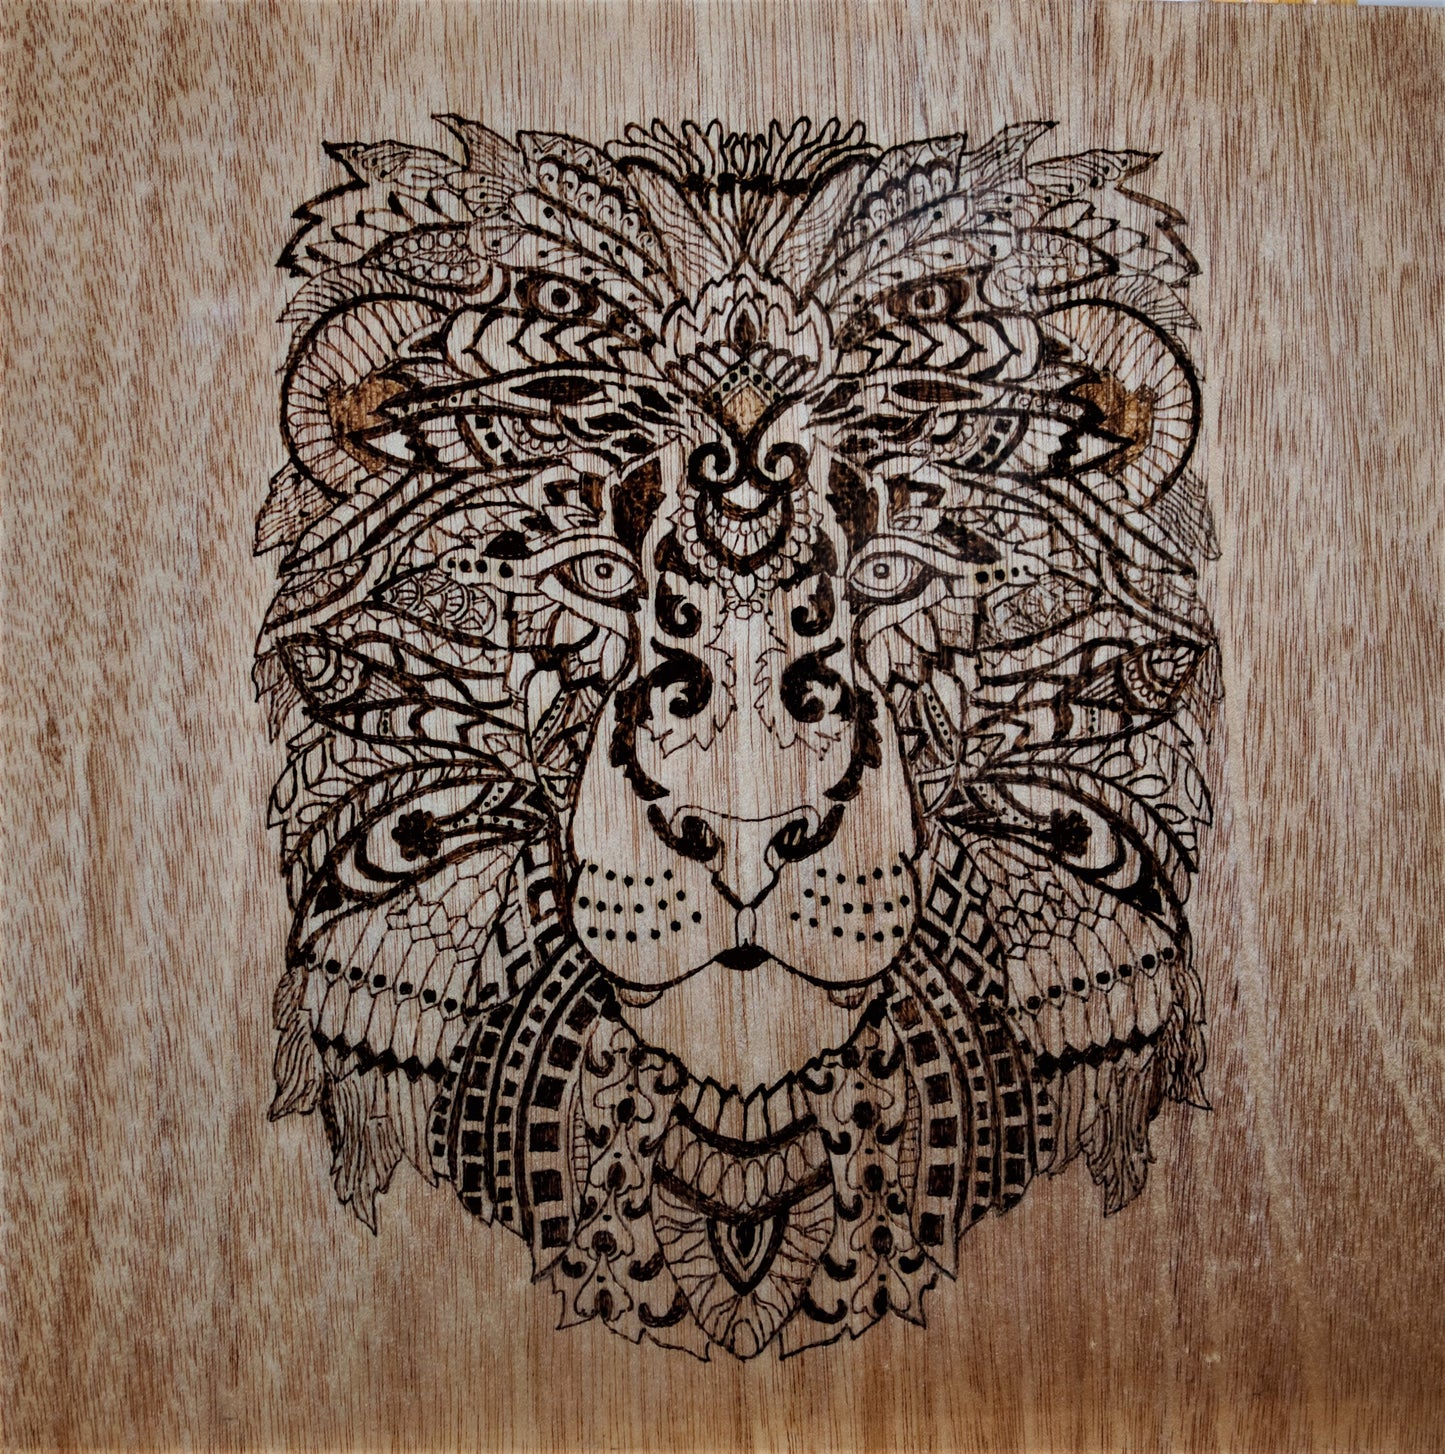 Hand-Crafted Woodburning - Abstract Floral Lion Panther Big Cat Face - Freehand Pyrography